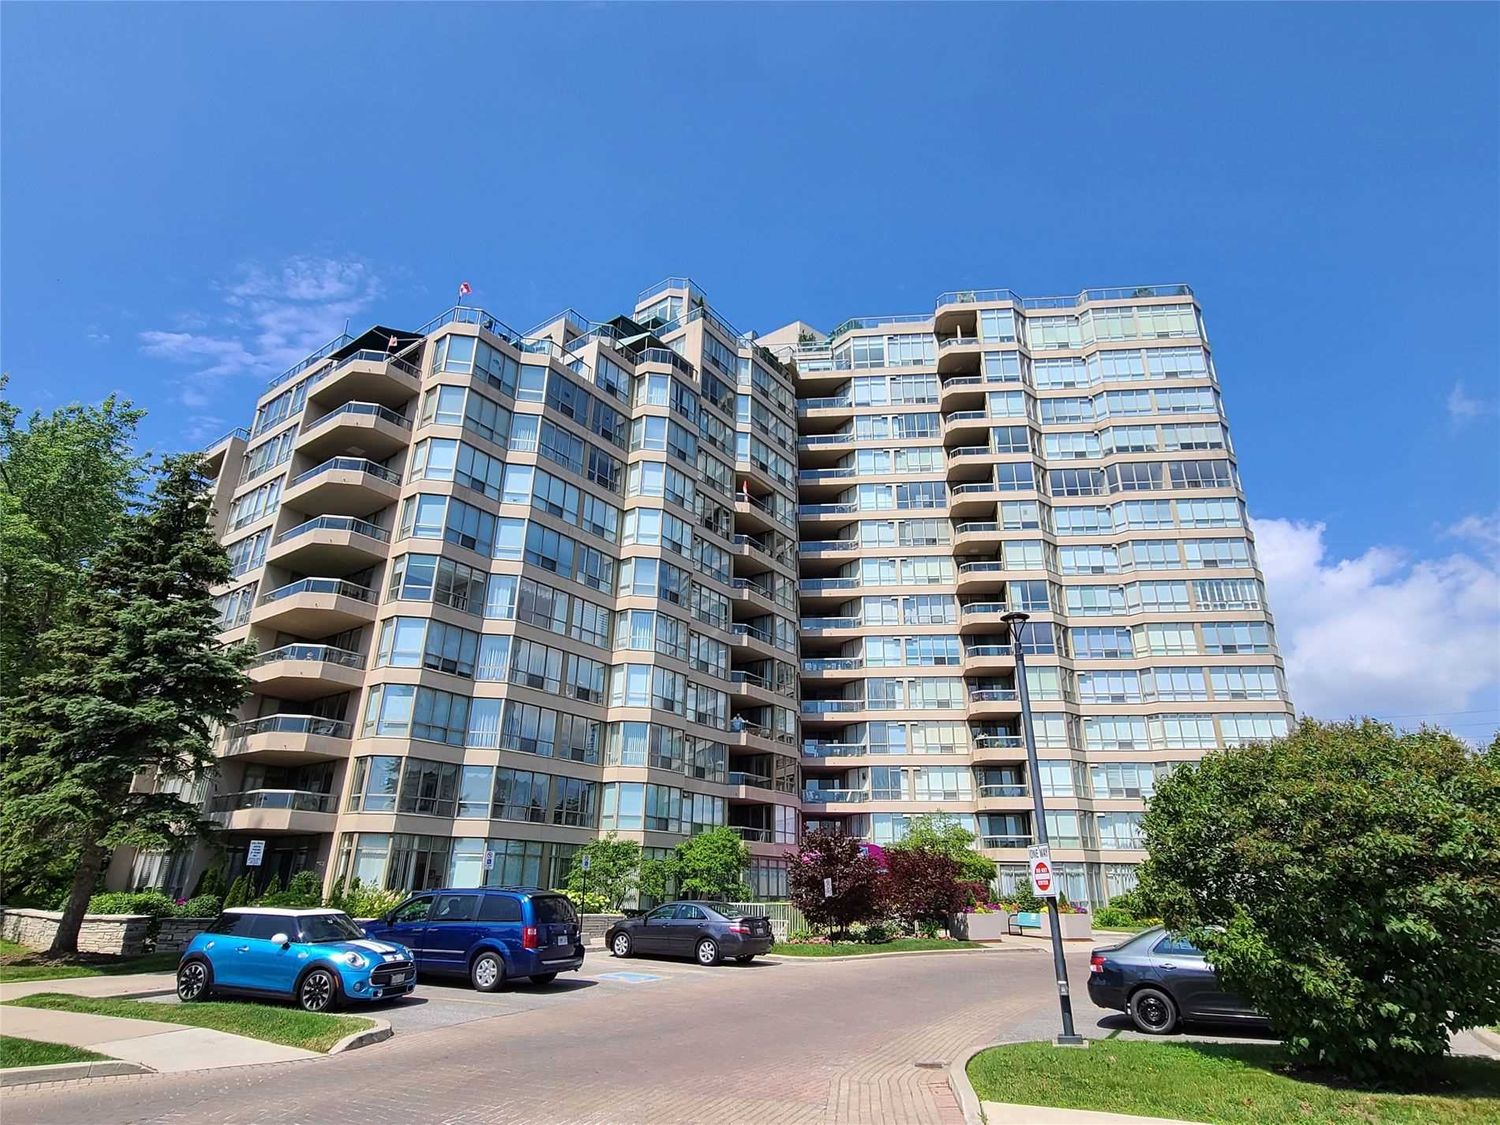 10 Guildwood Parkway. Gates of Guildwood II Condos is located in  Scarborough, Toronto - image #1 of 2